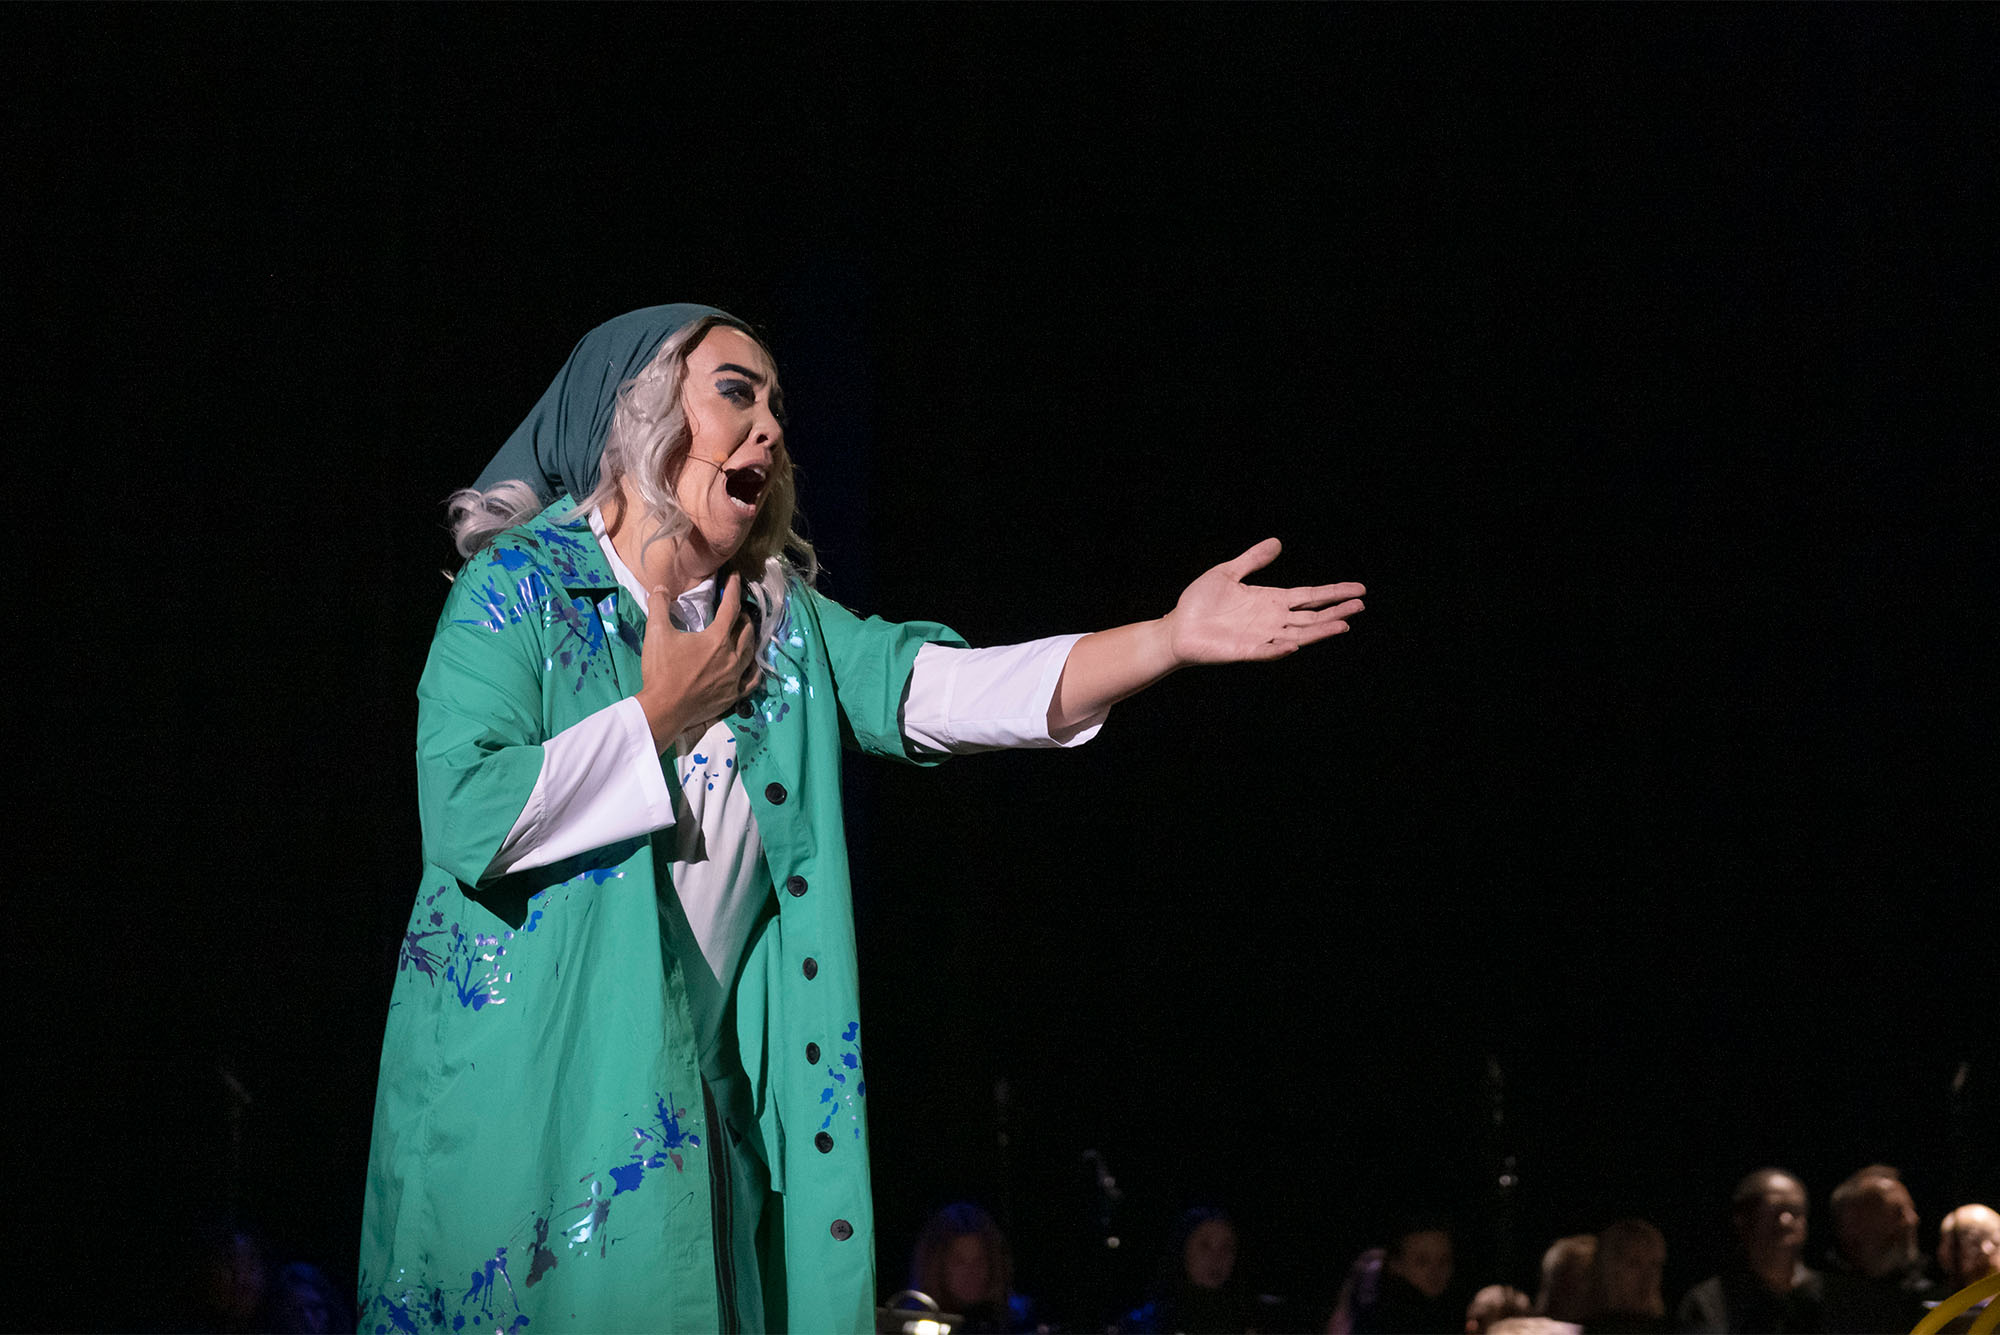 Photo: A woman wearing a hooded veil sings opera in front of a crowd